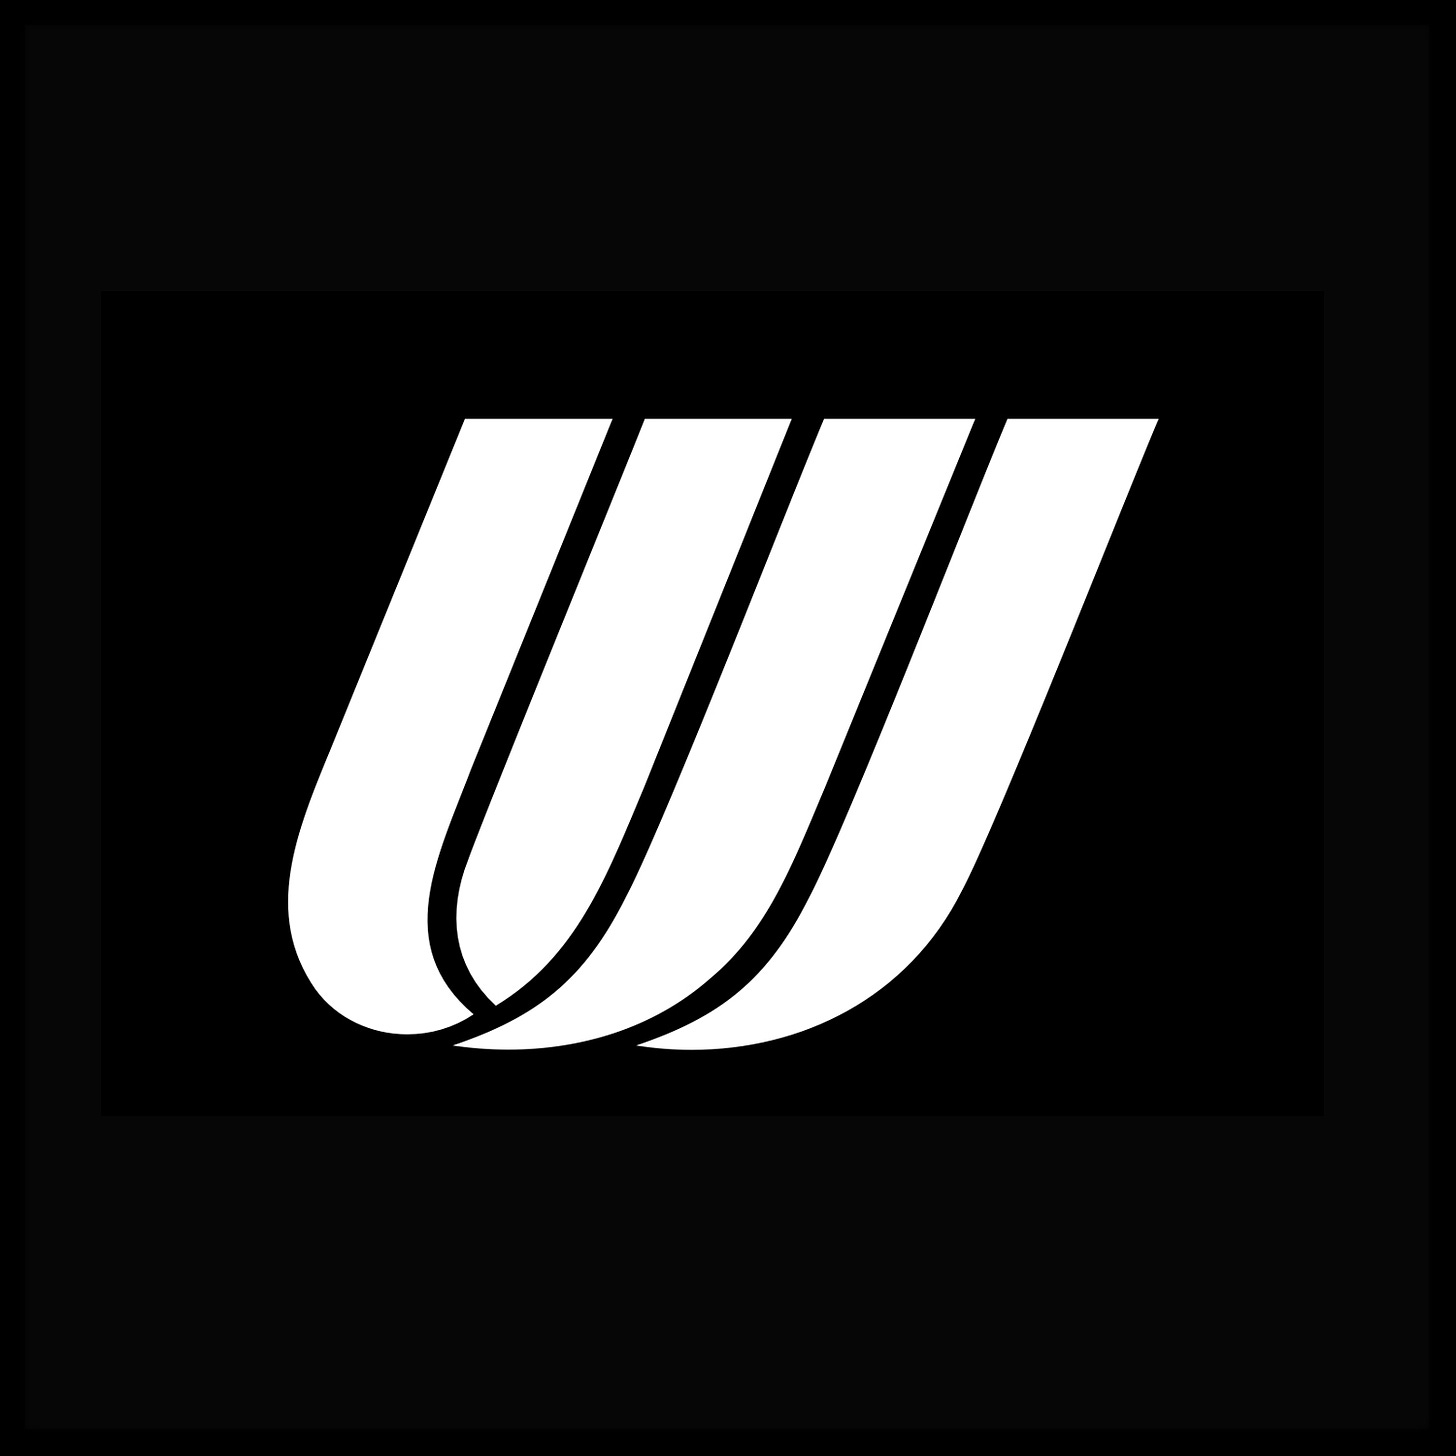 Saul Bass 1974 logo for United Airlines, LogoArchive, Logo Histories